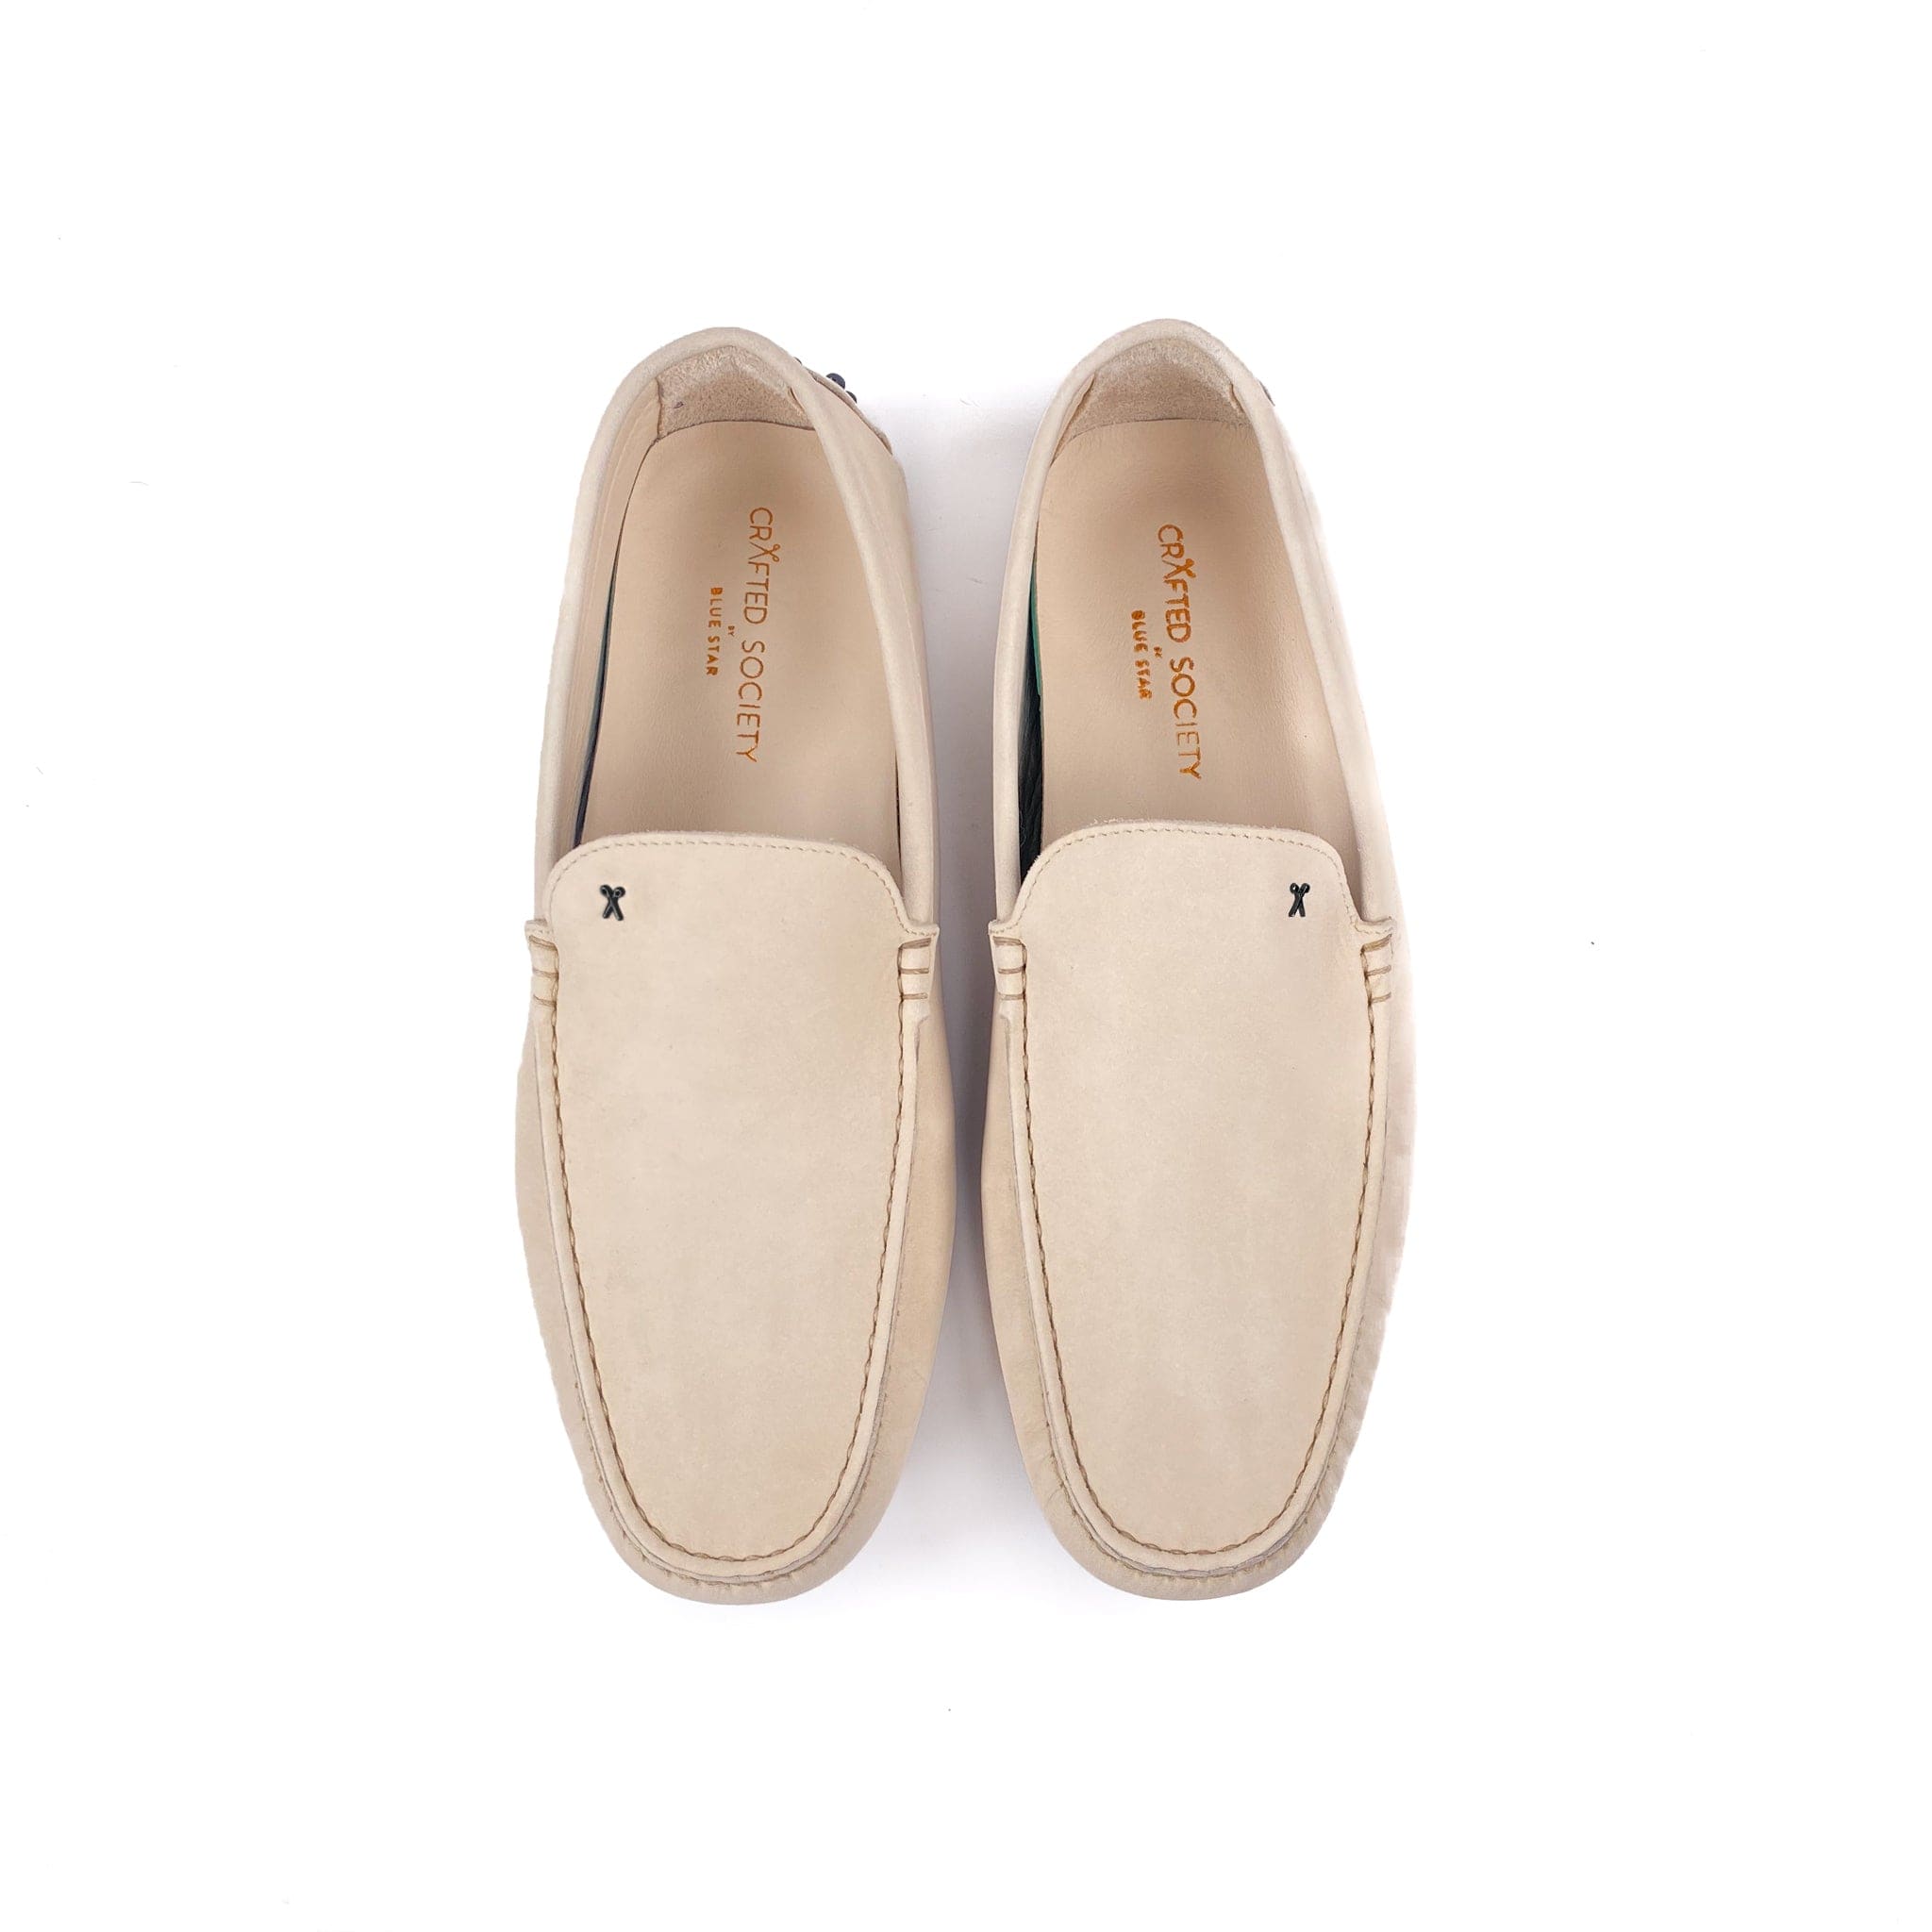 David Driving Shoe | Light Tan | Black Outsole | Made in Italy